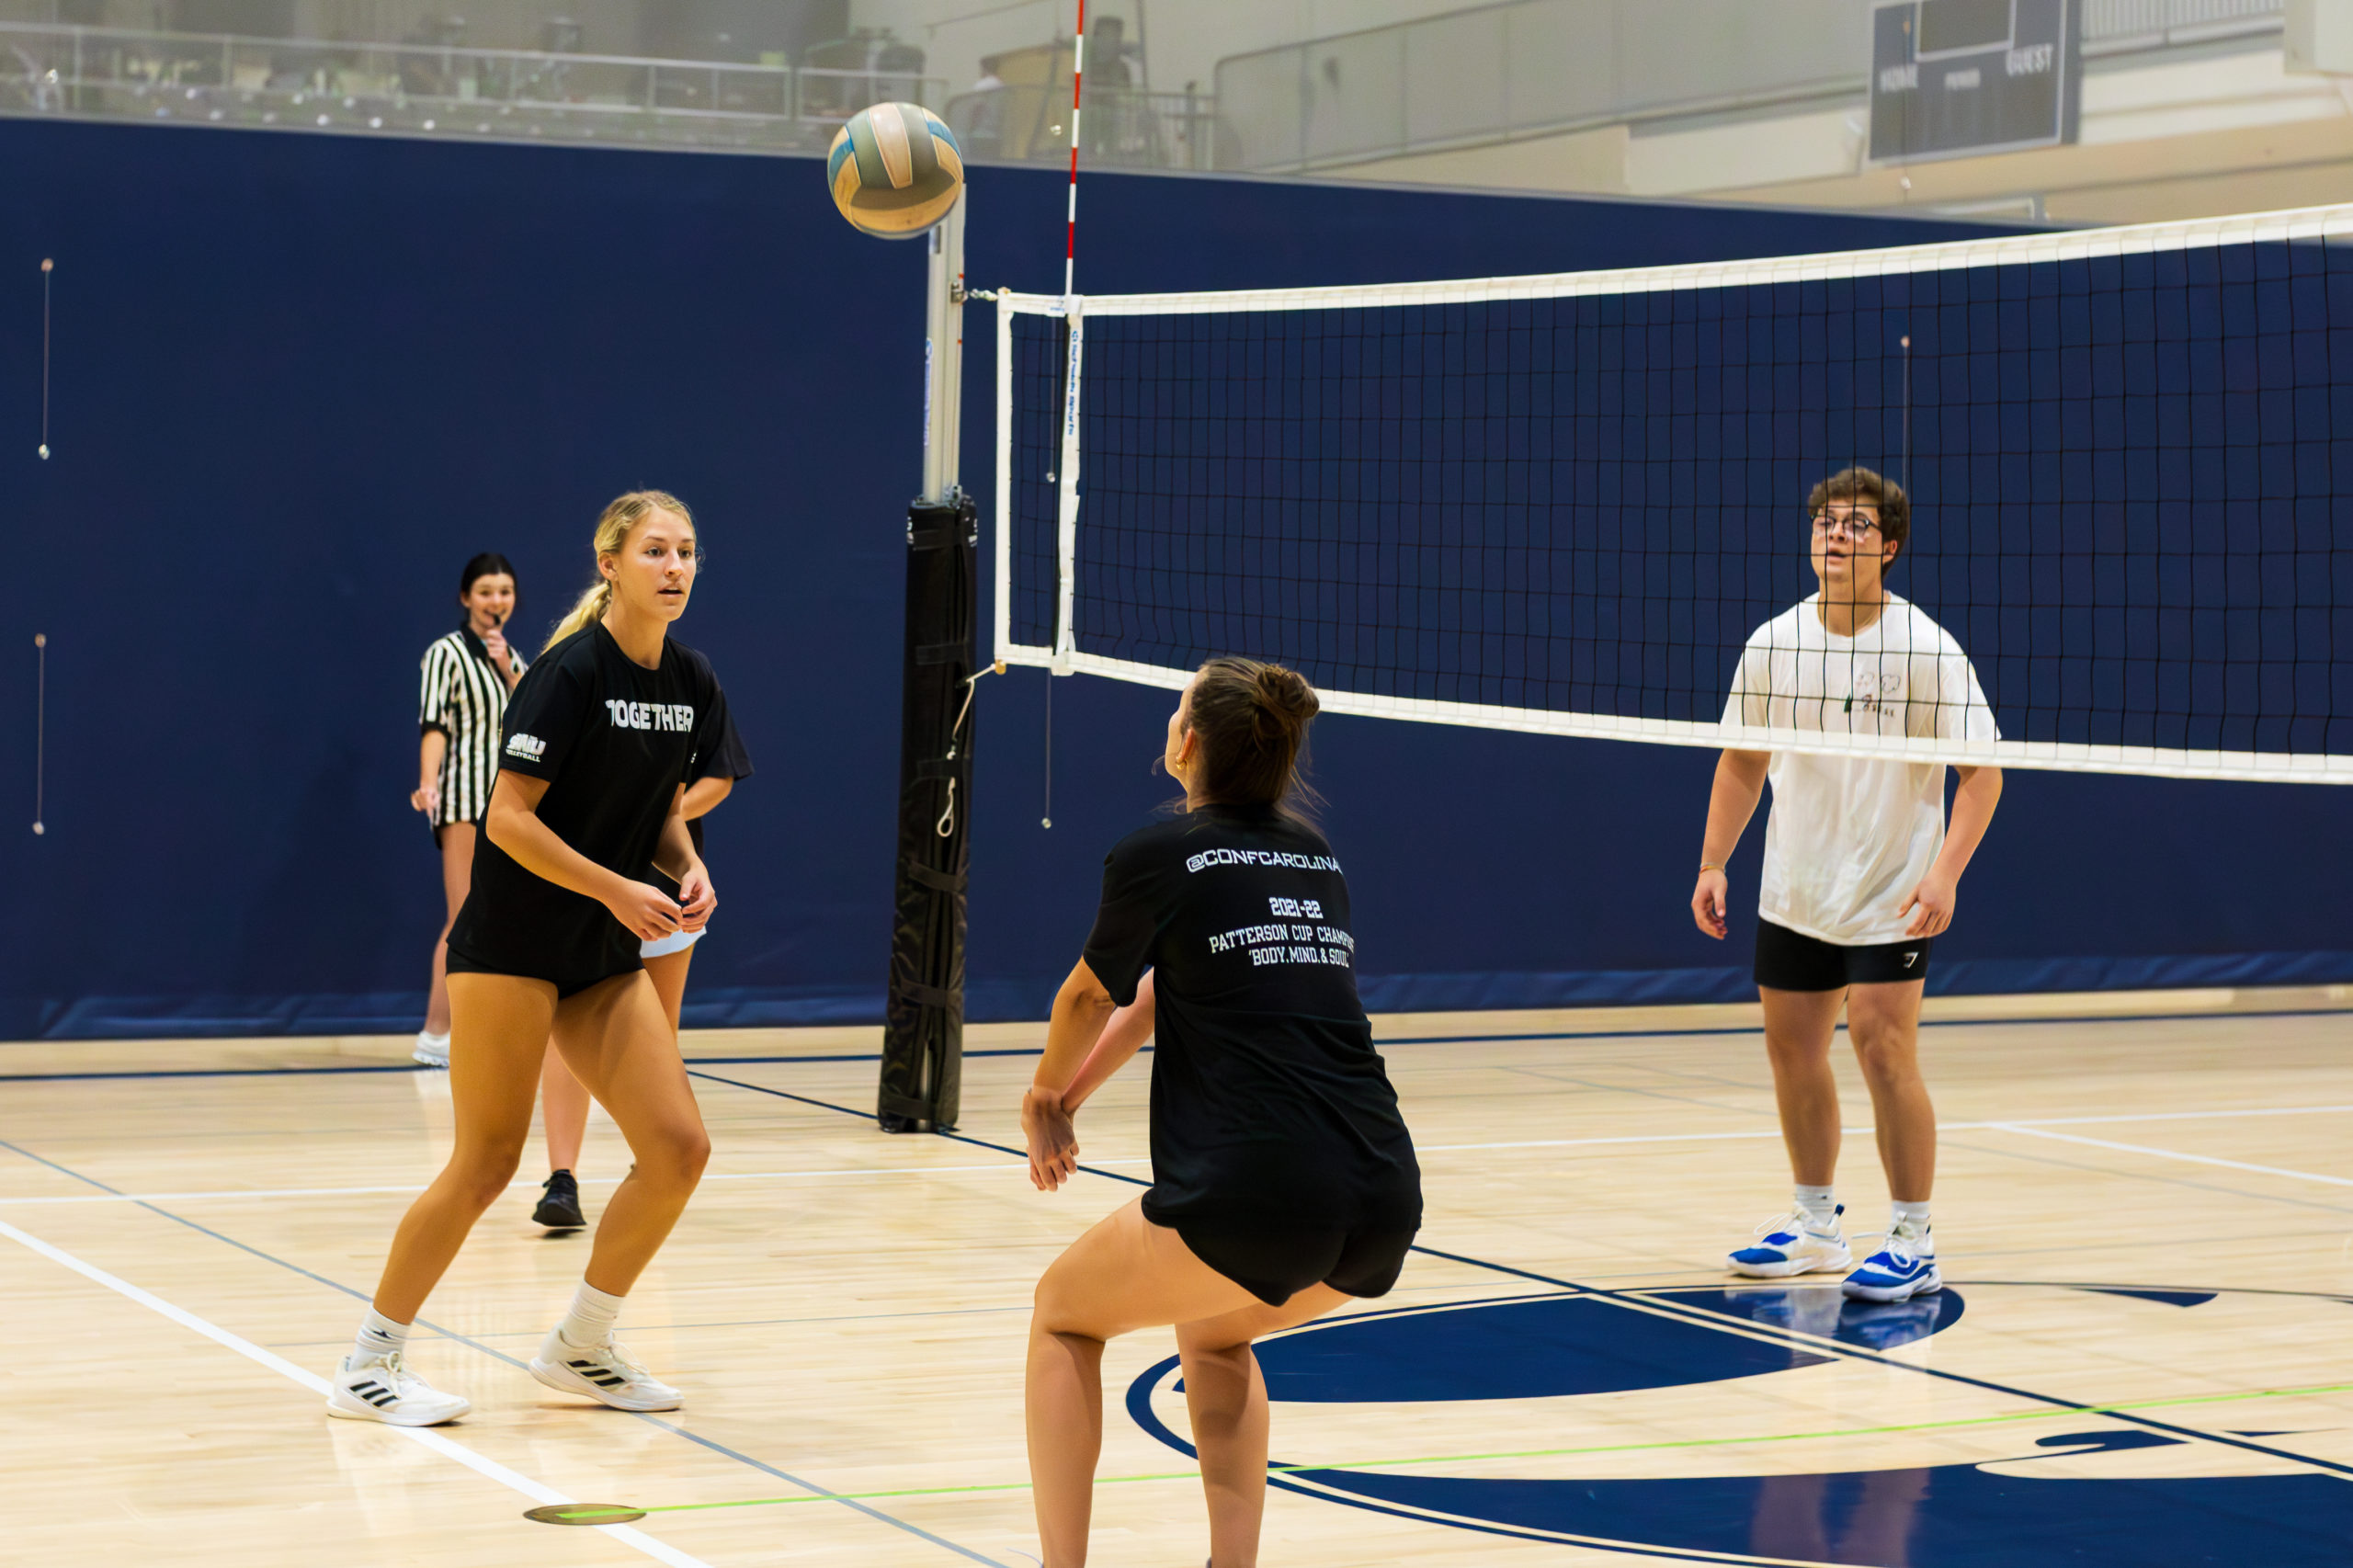 Photo+Gallery+9-13-23+Volleyball+Intramural+Finals